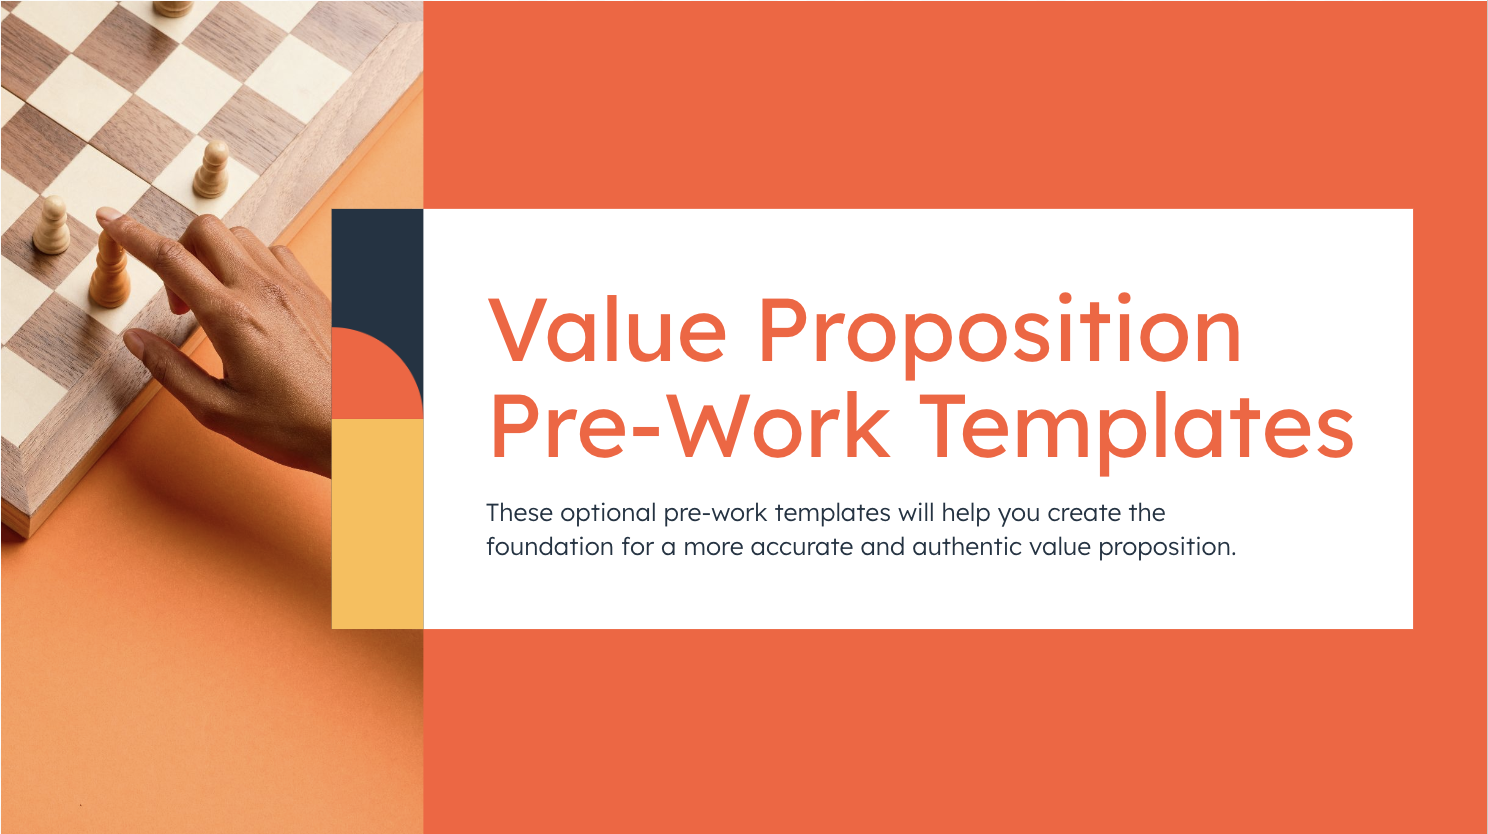 HubSpot's Value Proposition Templates - 2